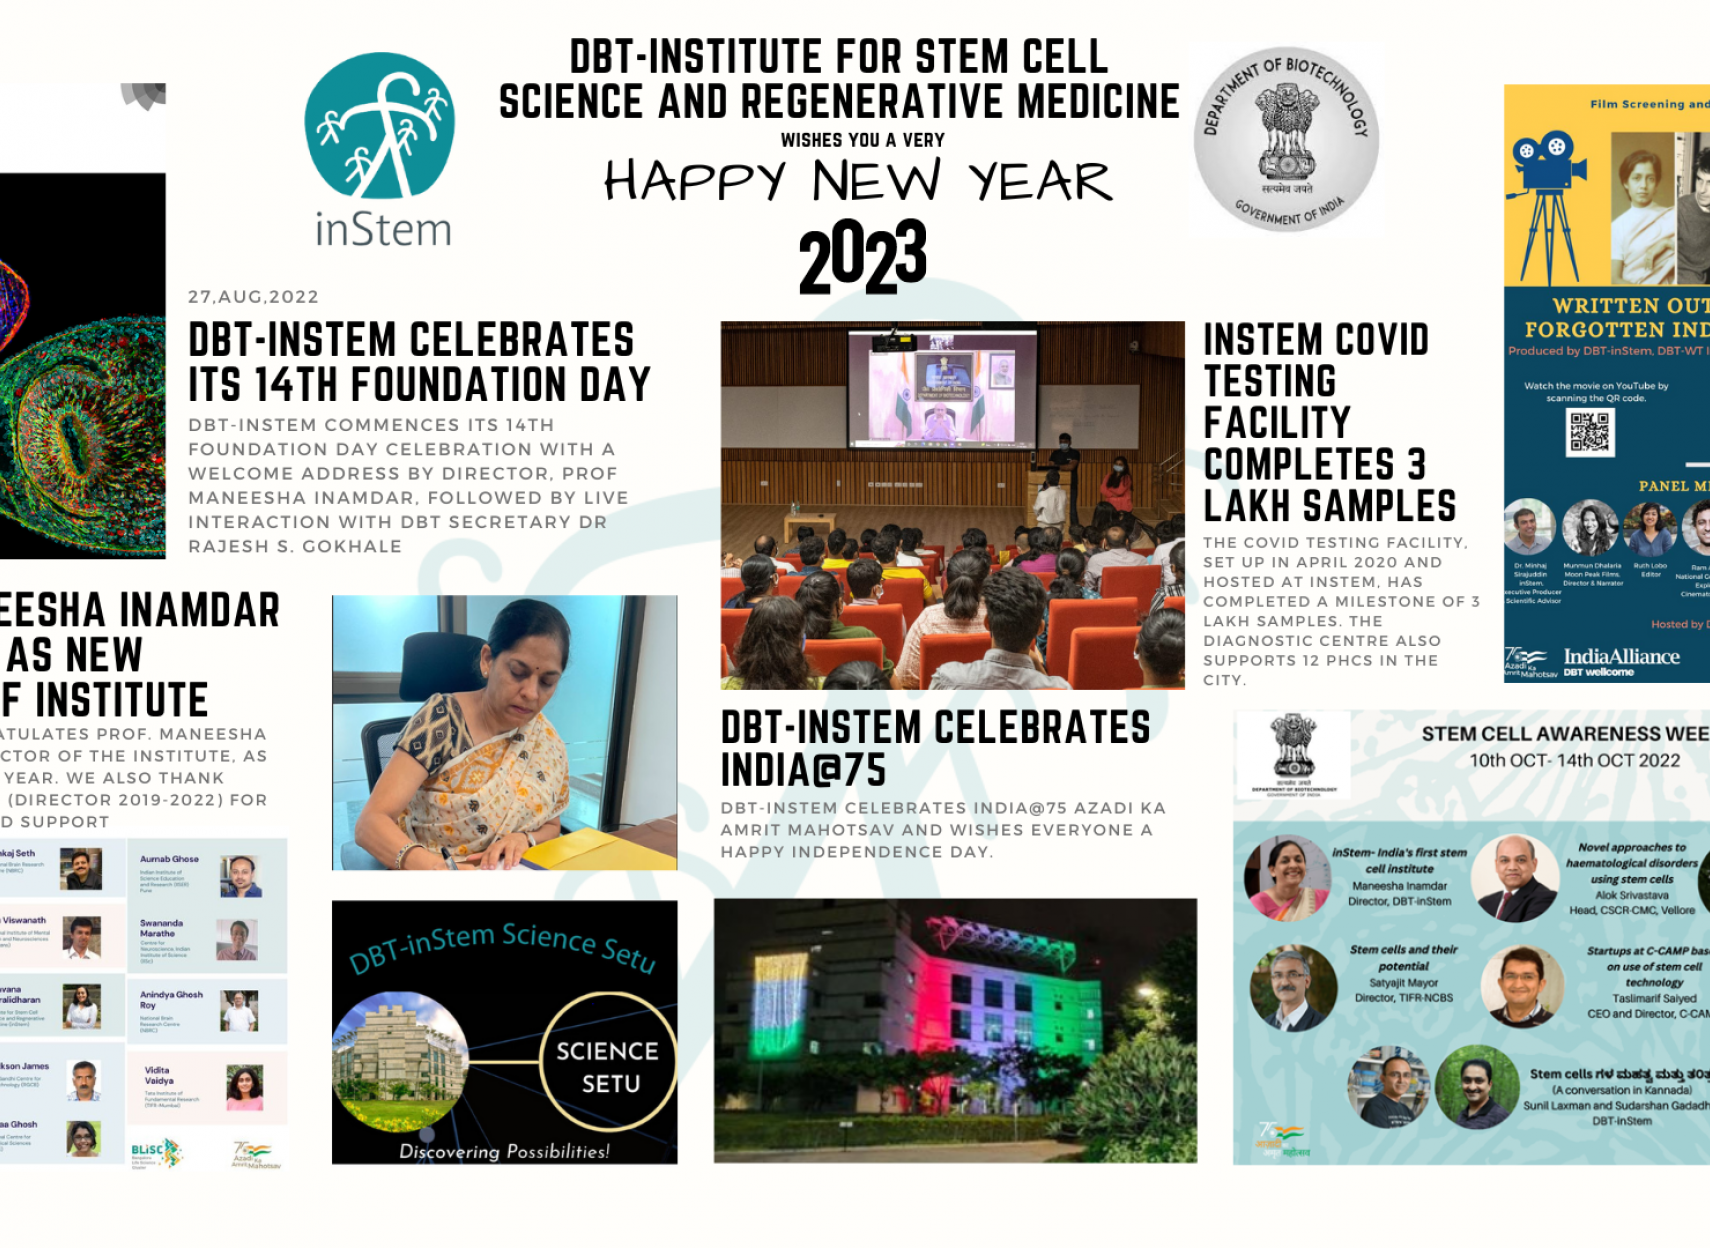 A poster with DBT-inStem happenings of 2022 and New year wishes